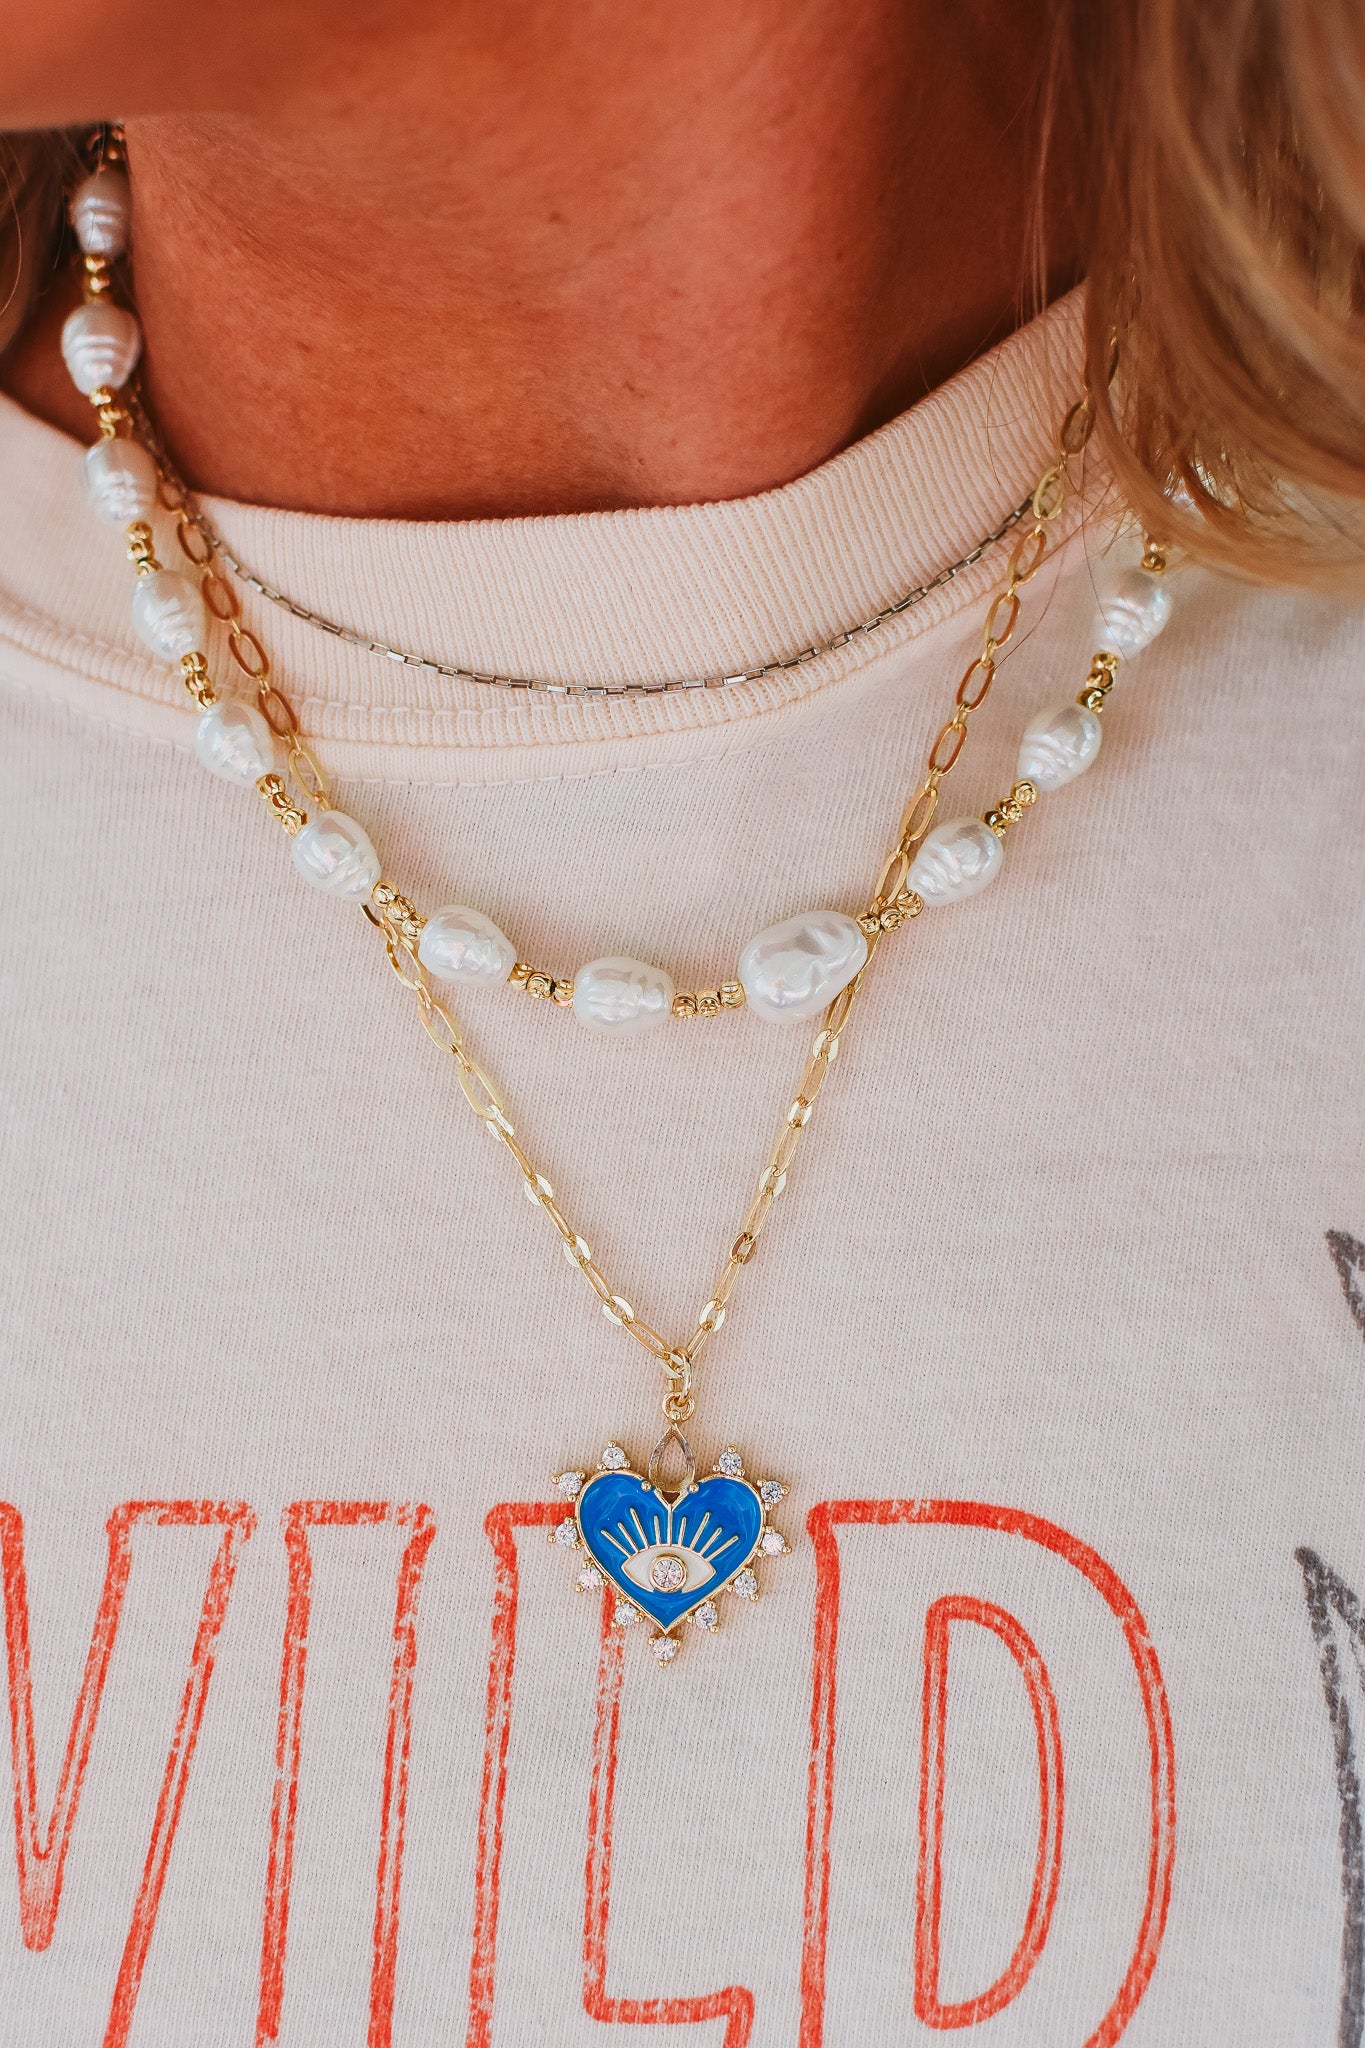 I See You Blue Heart Necklace